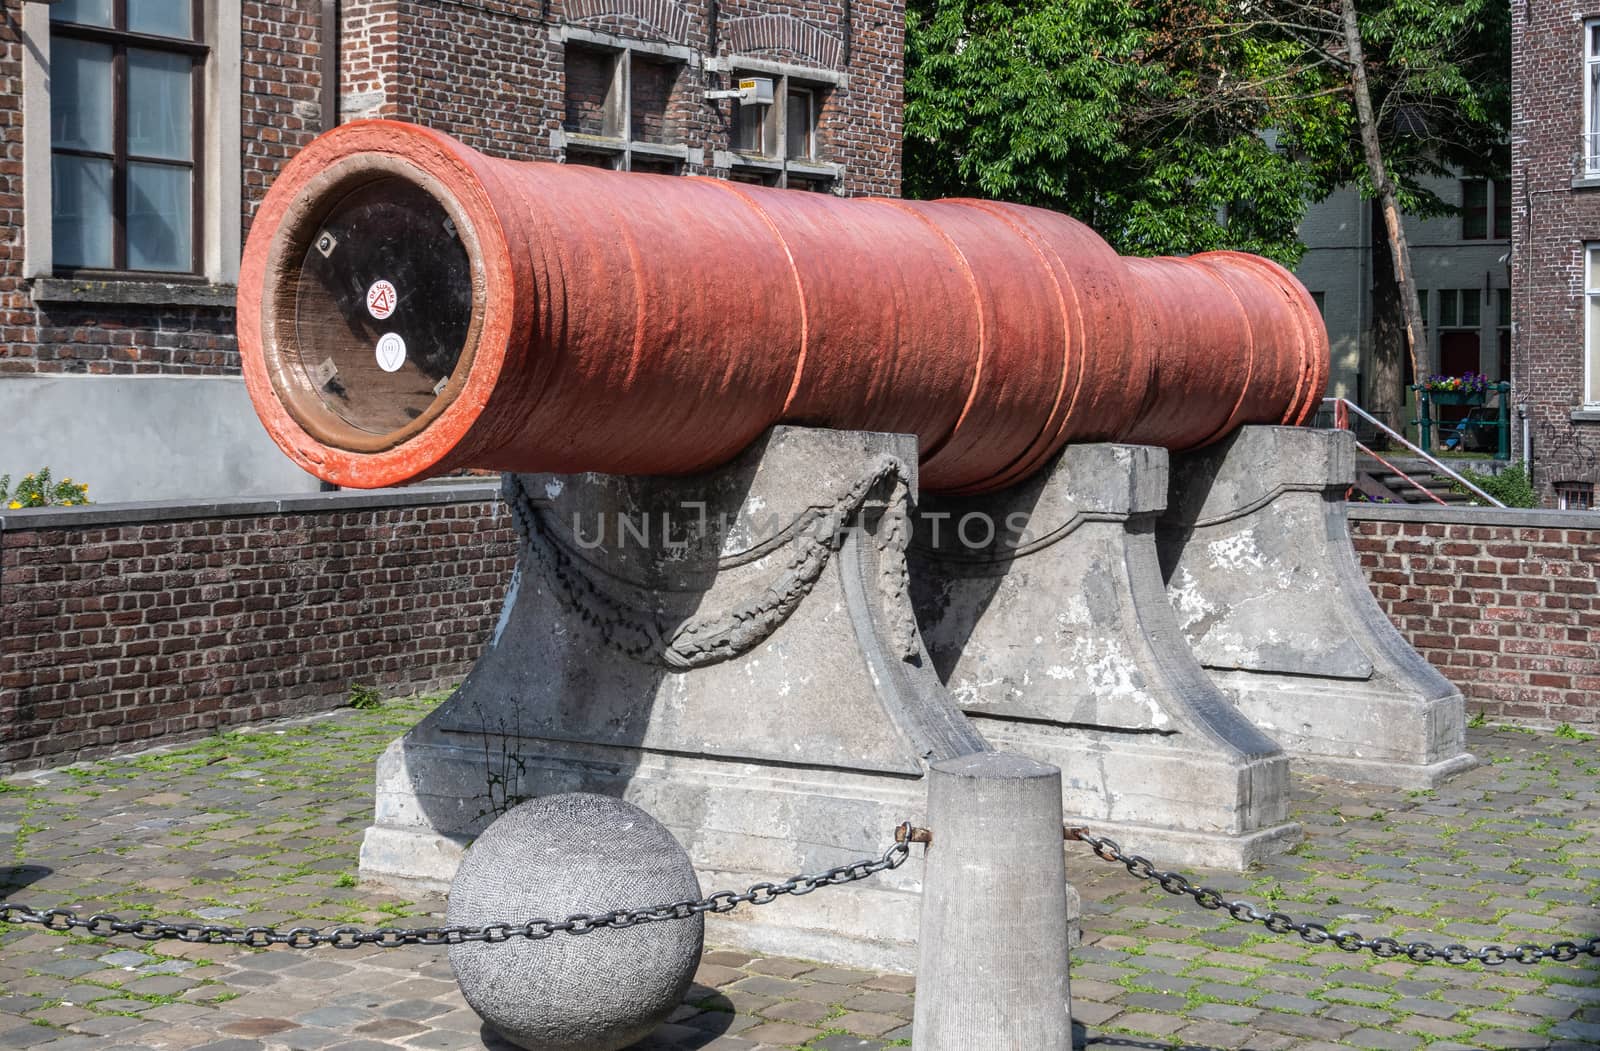 Historic Dulle Griet cannon in Gent, Flanders, Belgium. by Claudine